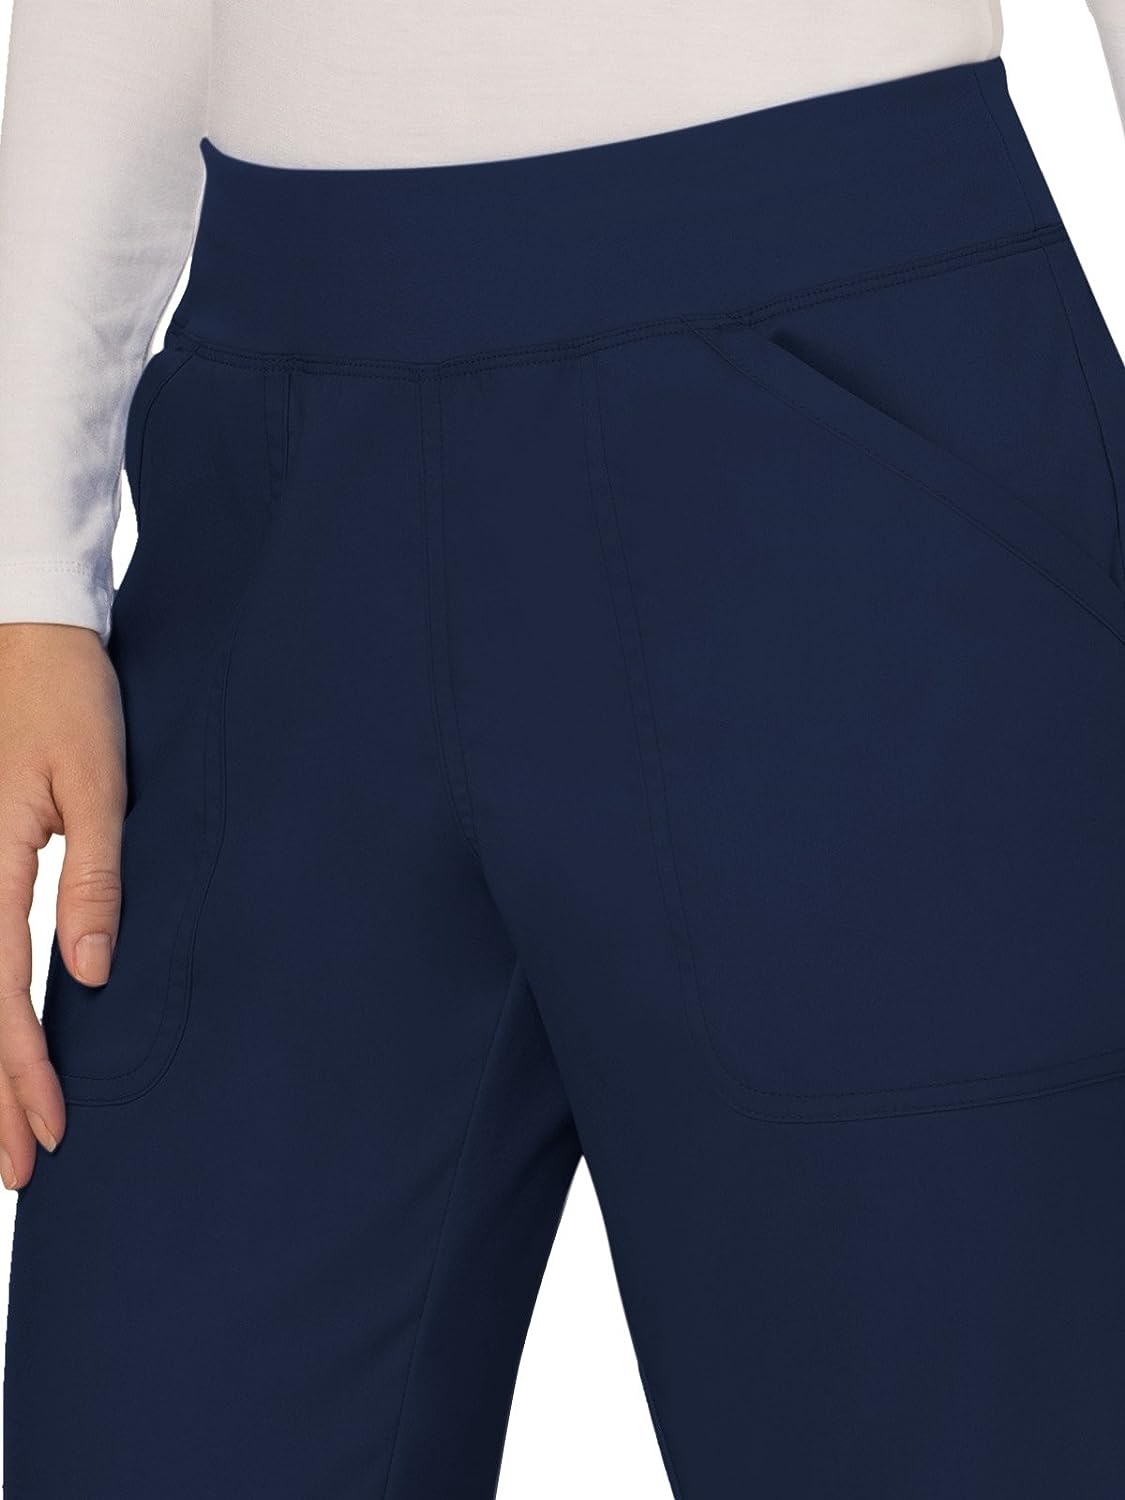 Pull-On Cargo Scrub Pants Review